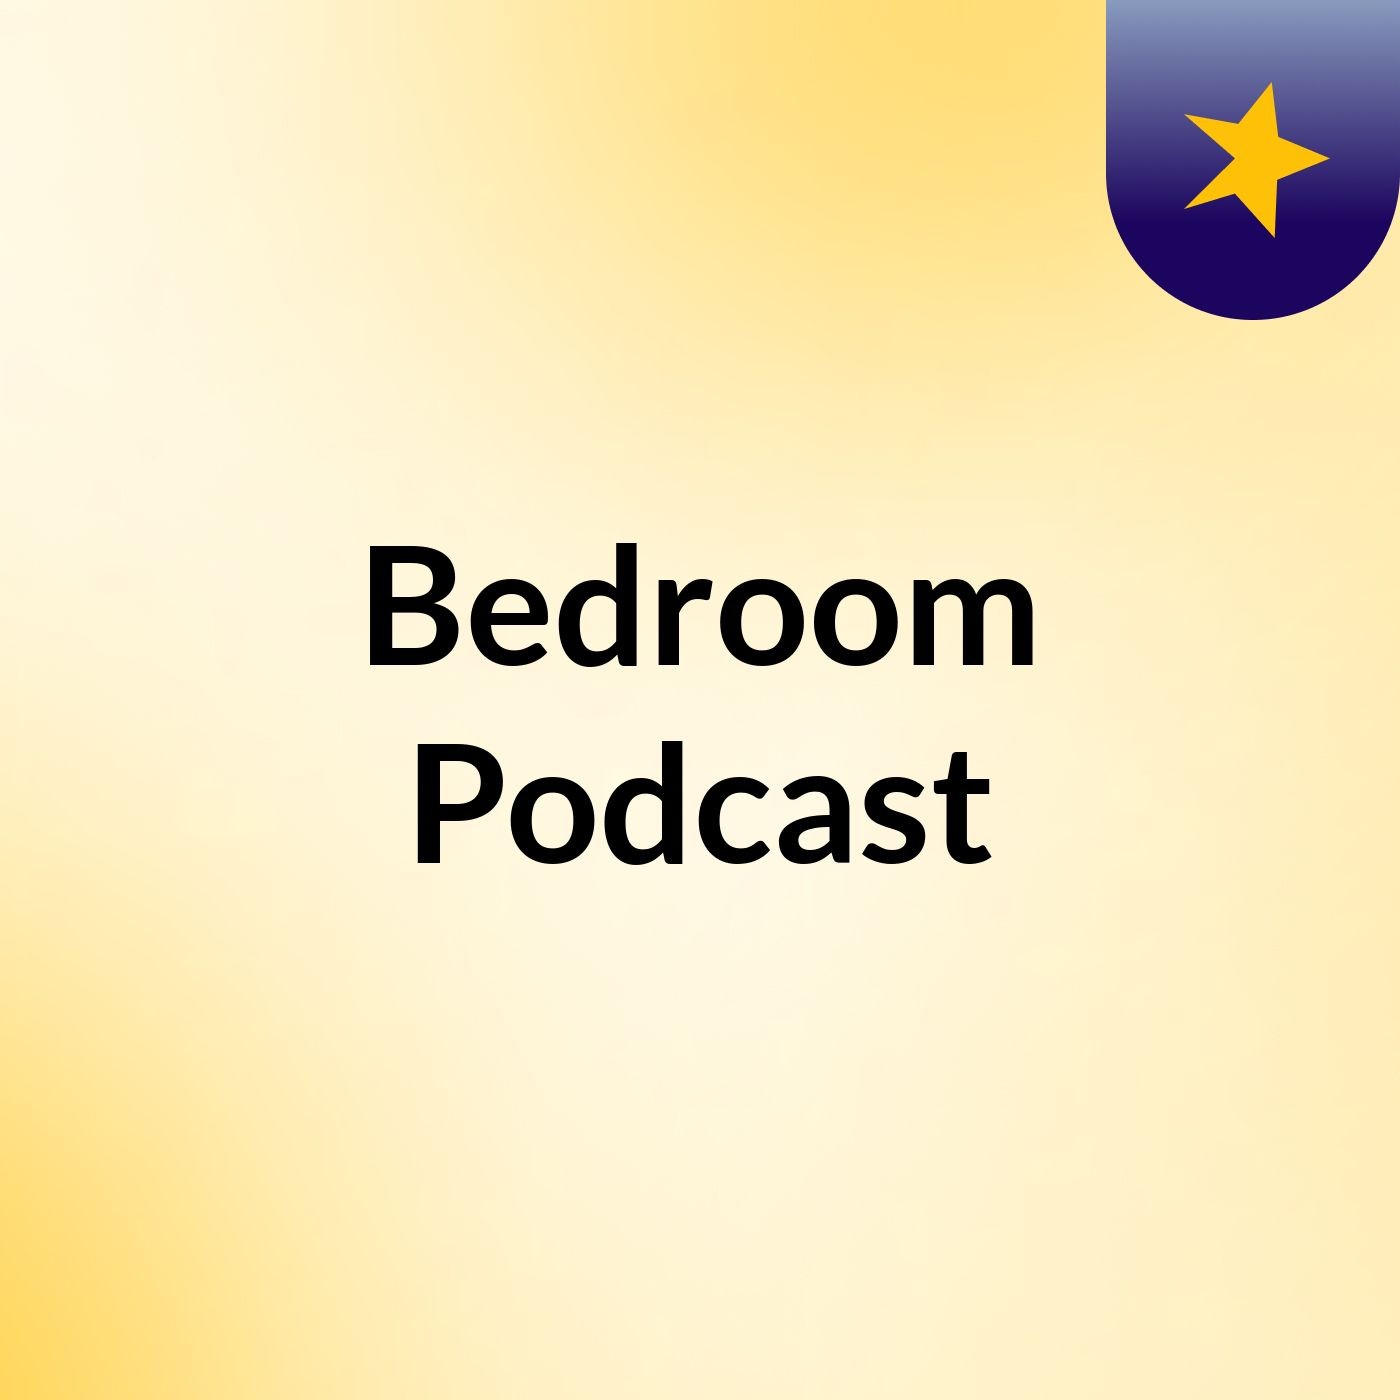 Bedroom Podcast